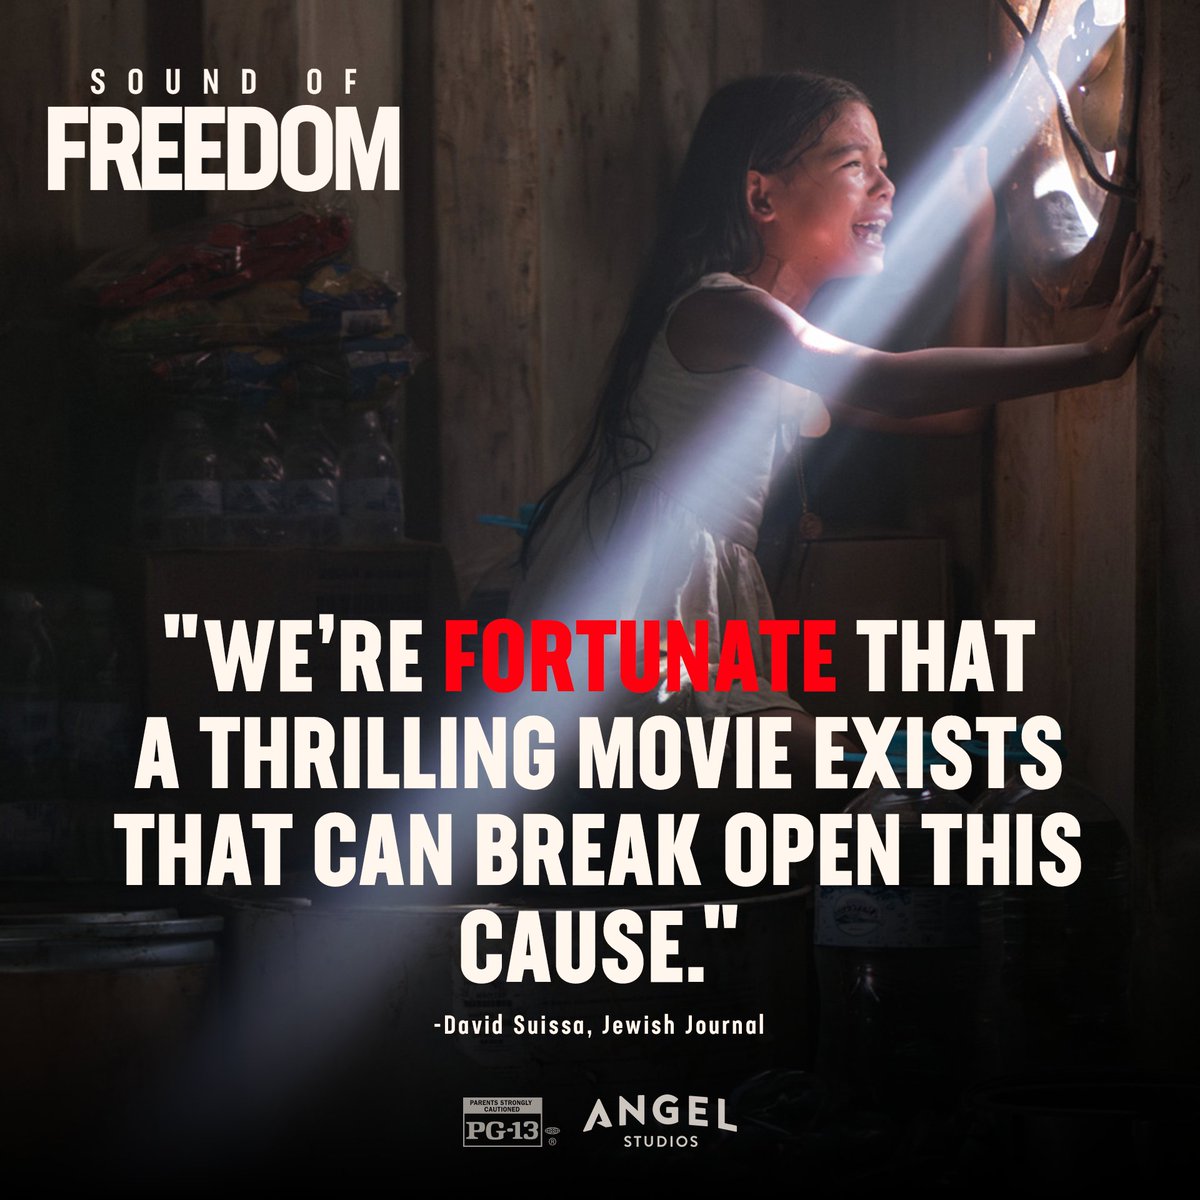 #2MillionFor2Million #SoundofFreedomMovie #fightforthelight 

See Sound of Freedom in theaters today. Get showtimes at angel.com/tickets